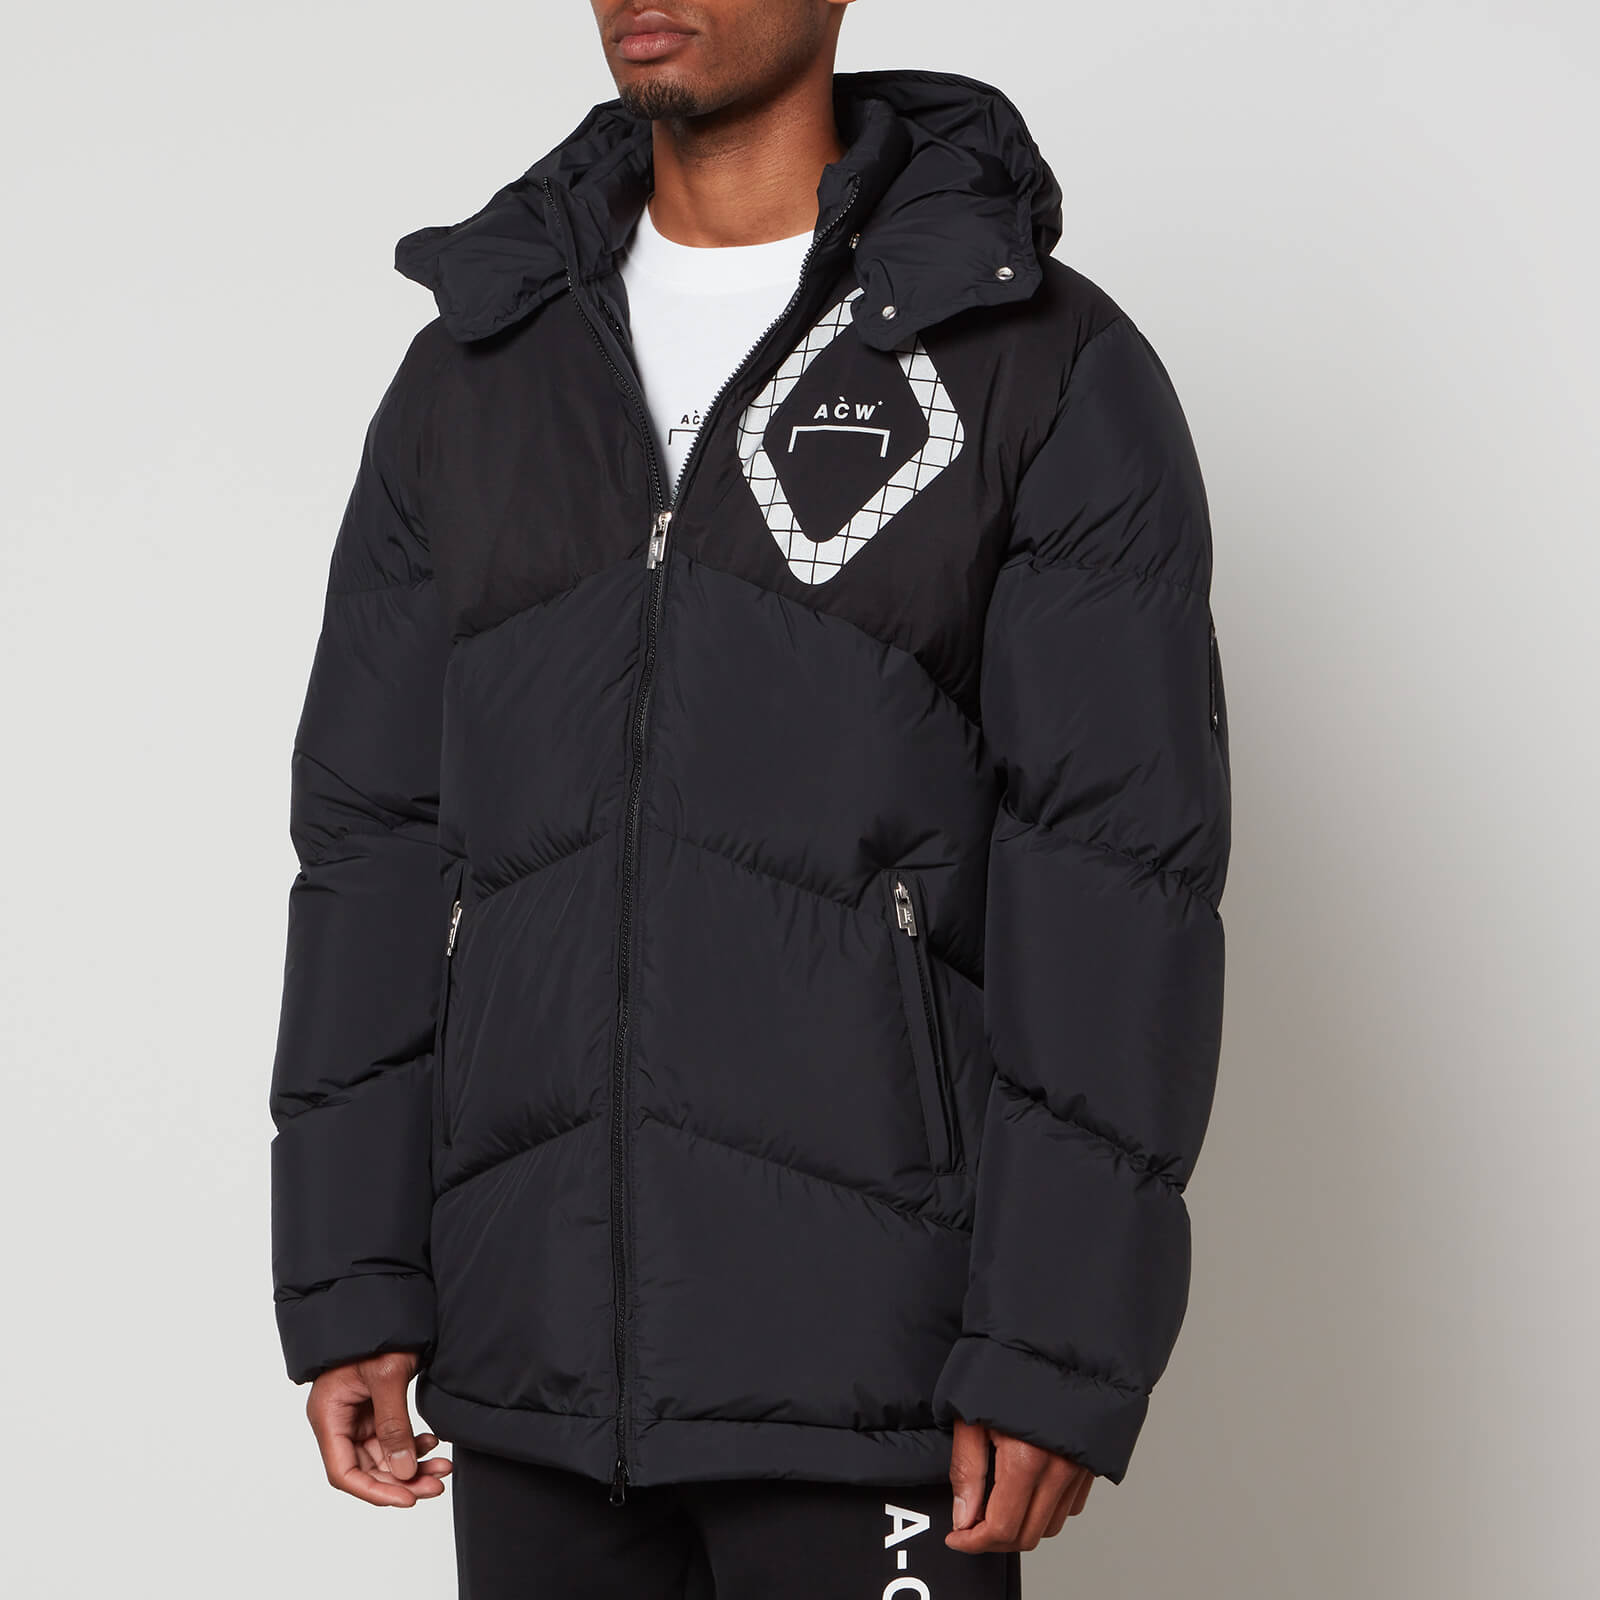 A-COLD-WALL* Men's Panelled Down Jacket - Black - S